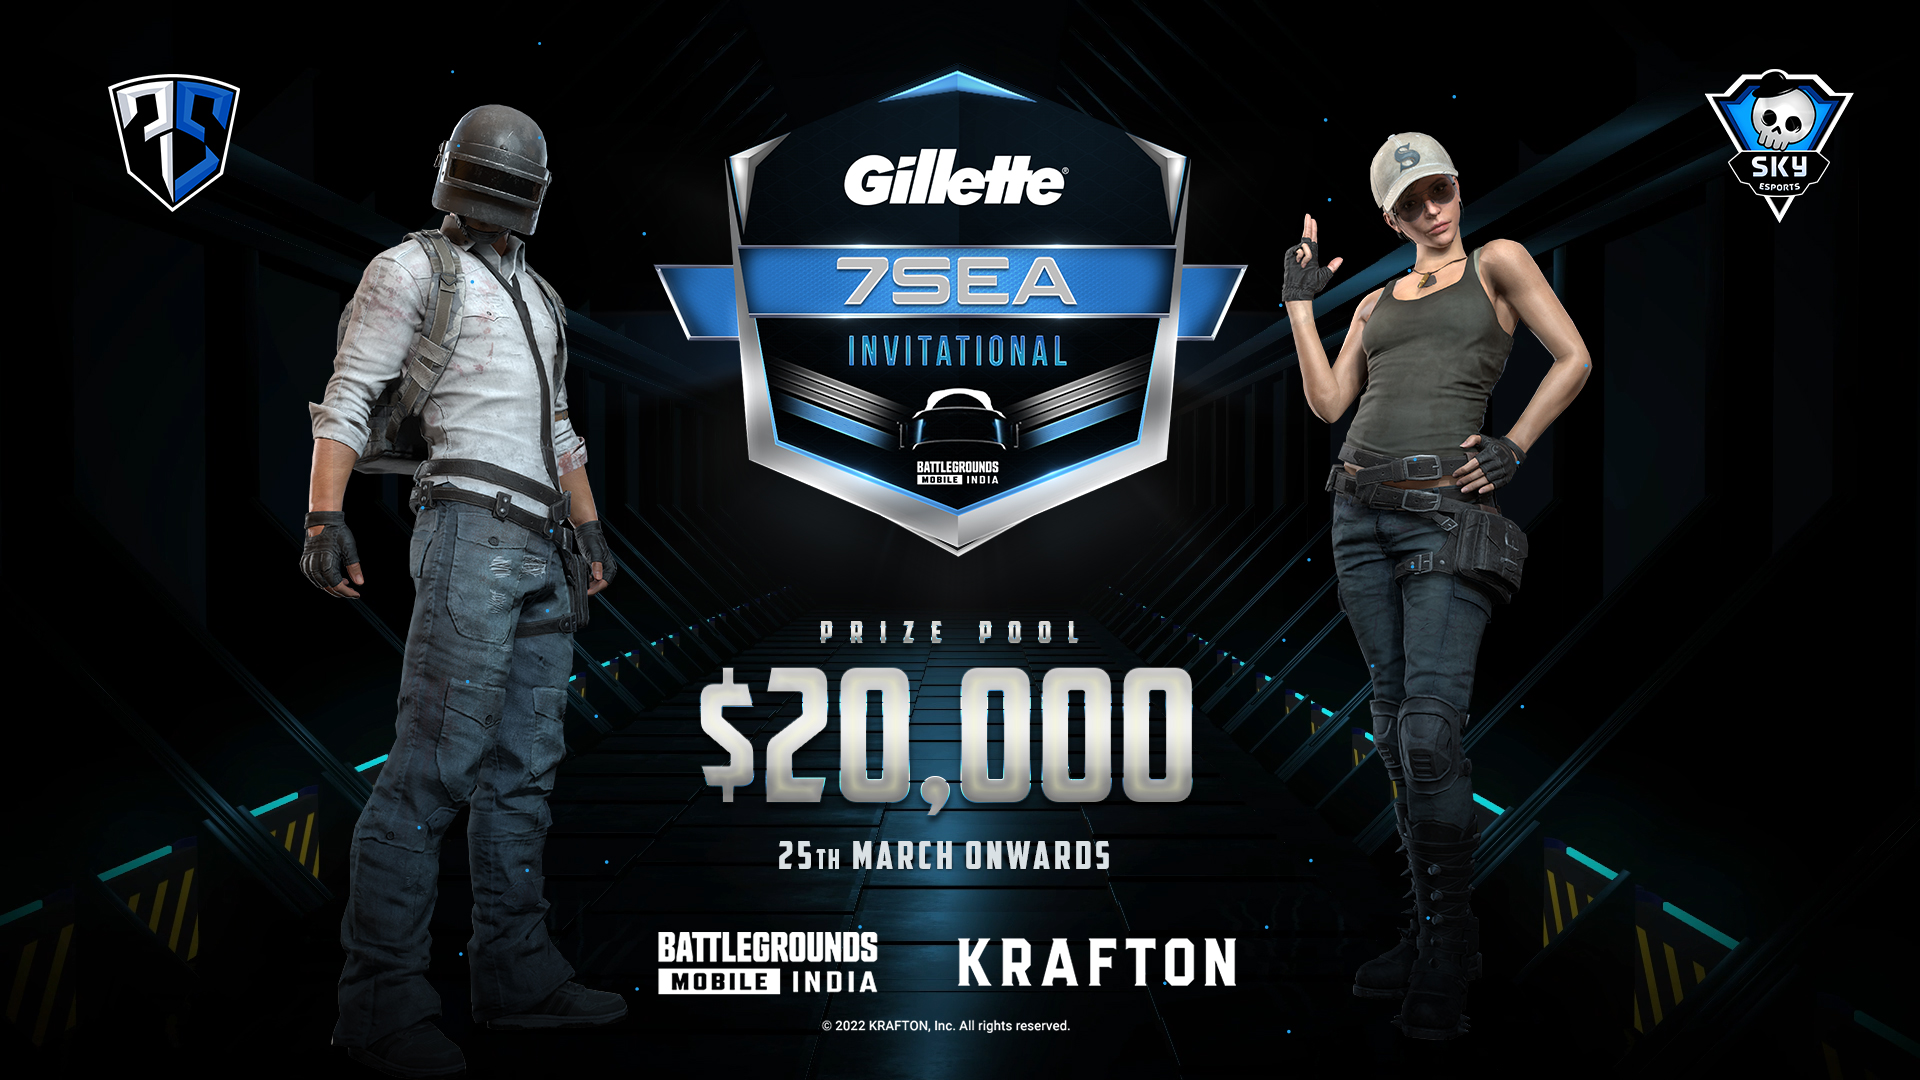 Gillette 7Sea Invitational to feature the top 24 BGMI teams of India Big Prize Pool of a $20,000